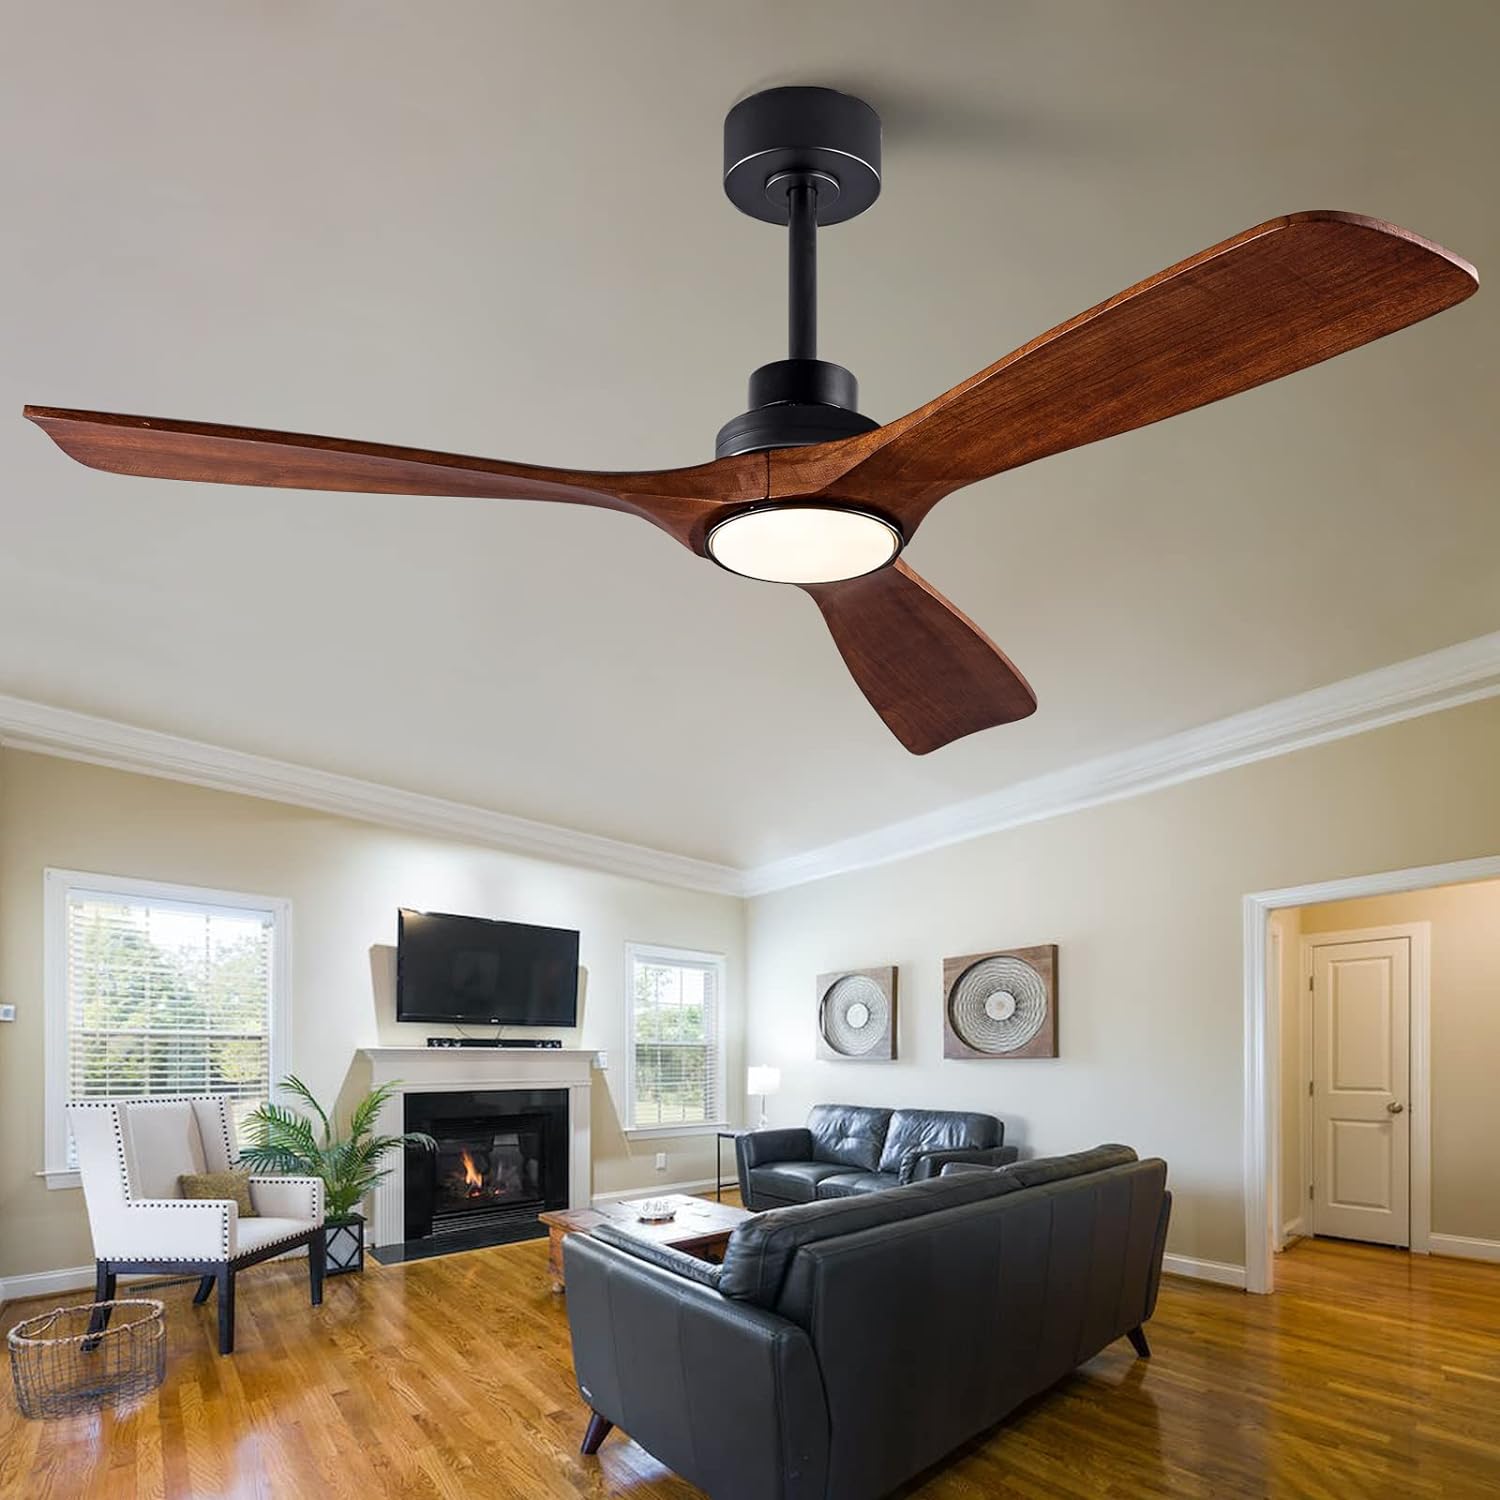 Limited-Time Promo: QUTWOB 52" Wood Ceiling Fan with Lights - Up to 21% Off!